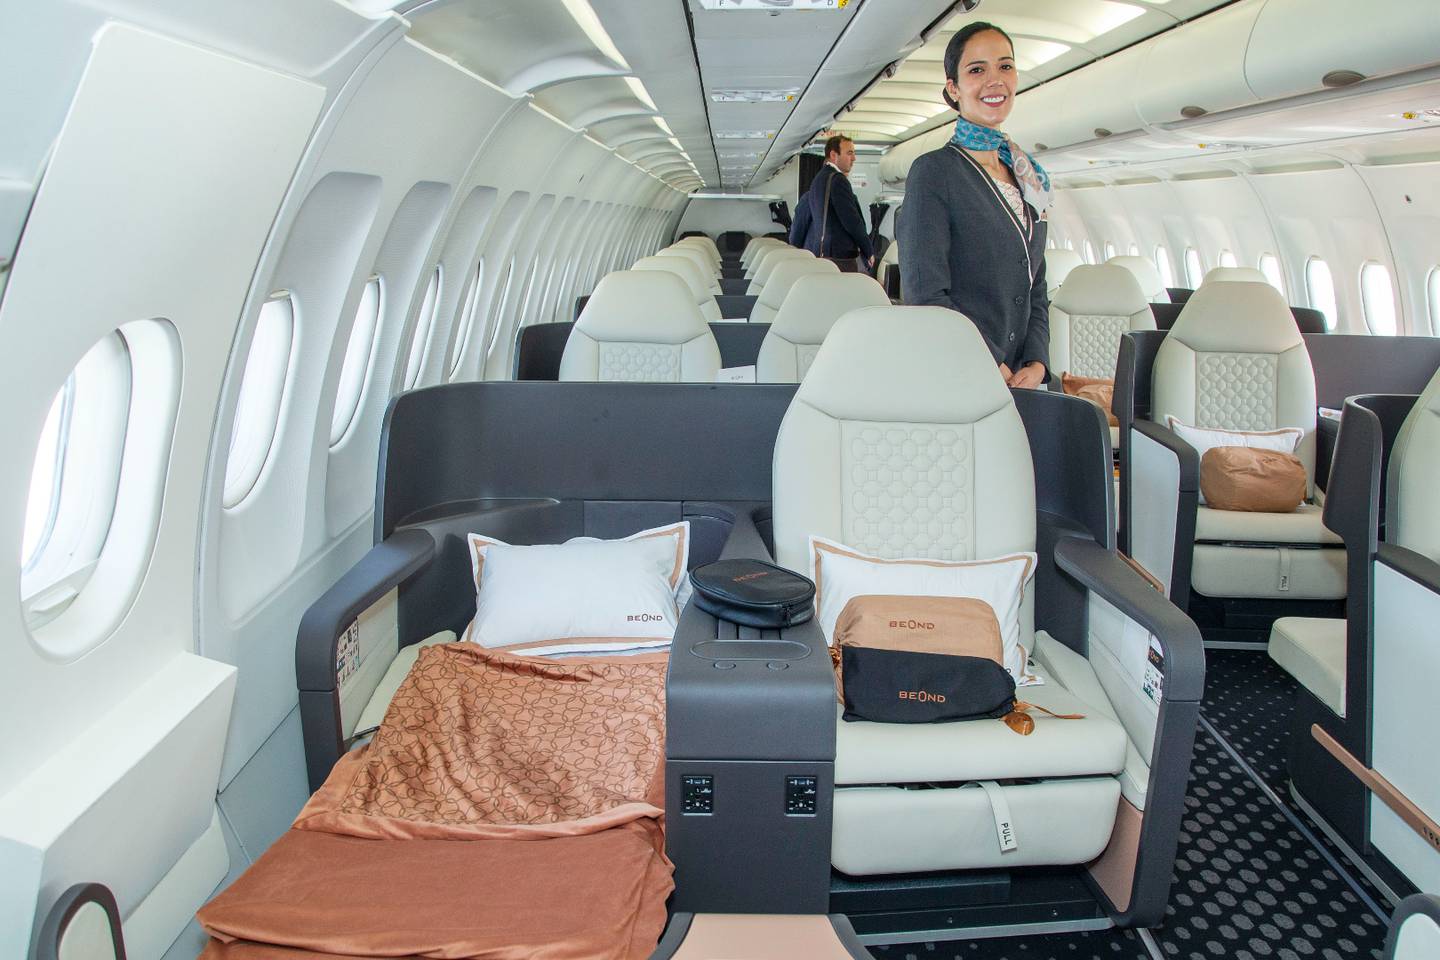 A look inside Beond's budget-friendly luxury aircraft at Dubai Airshow